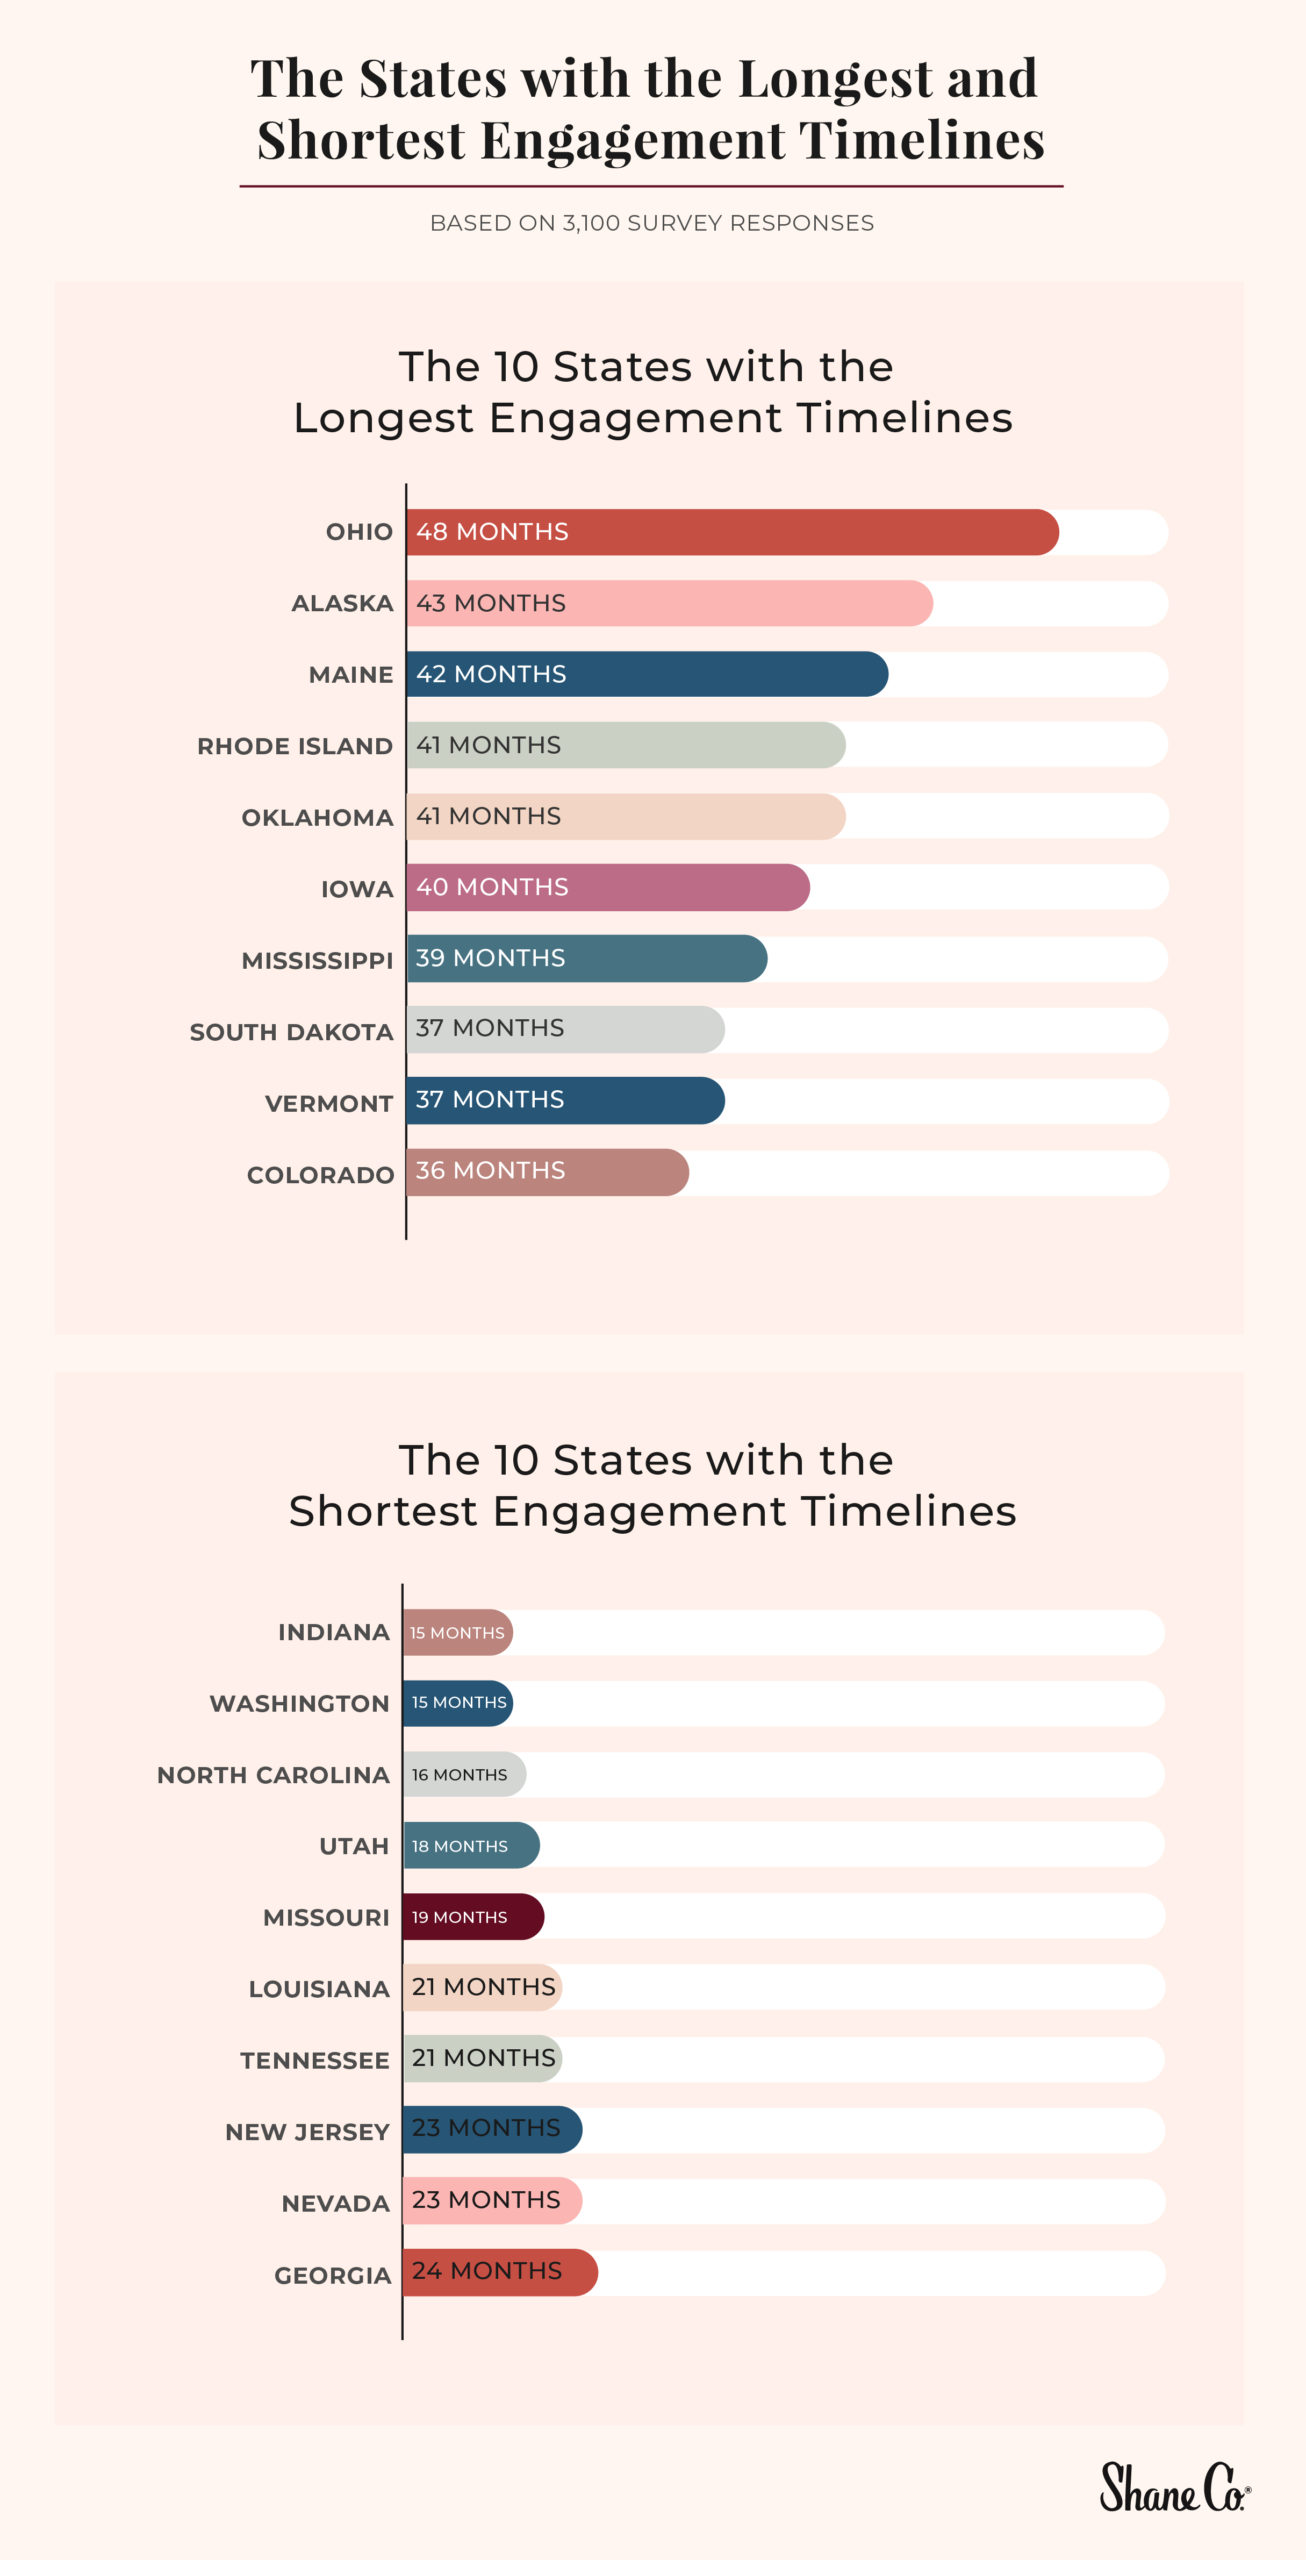 Graphic showing top 10 states with longest and shortest engagement timelines